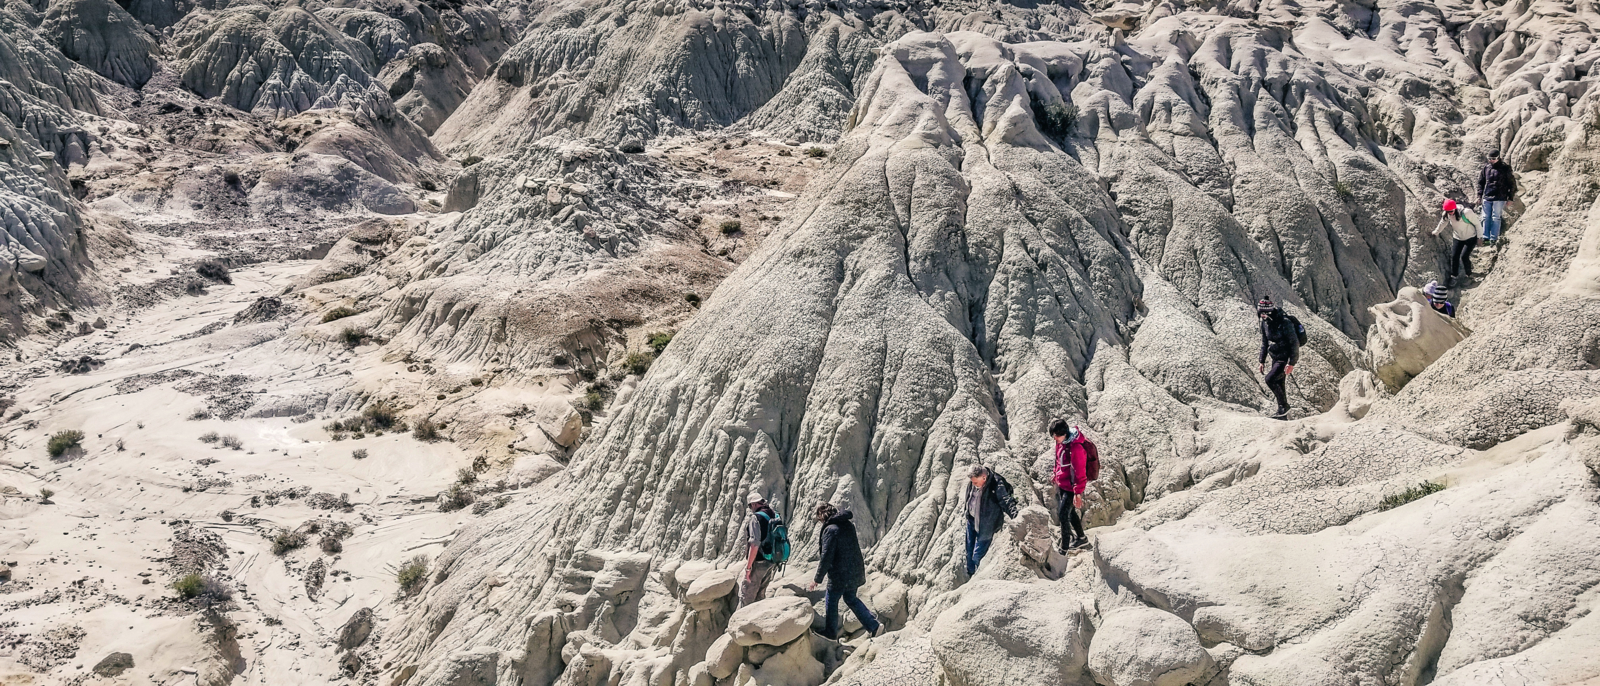 Hikers in La Leona, a petrified forest in Patagonia, Argentina with dinosaur fossils